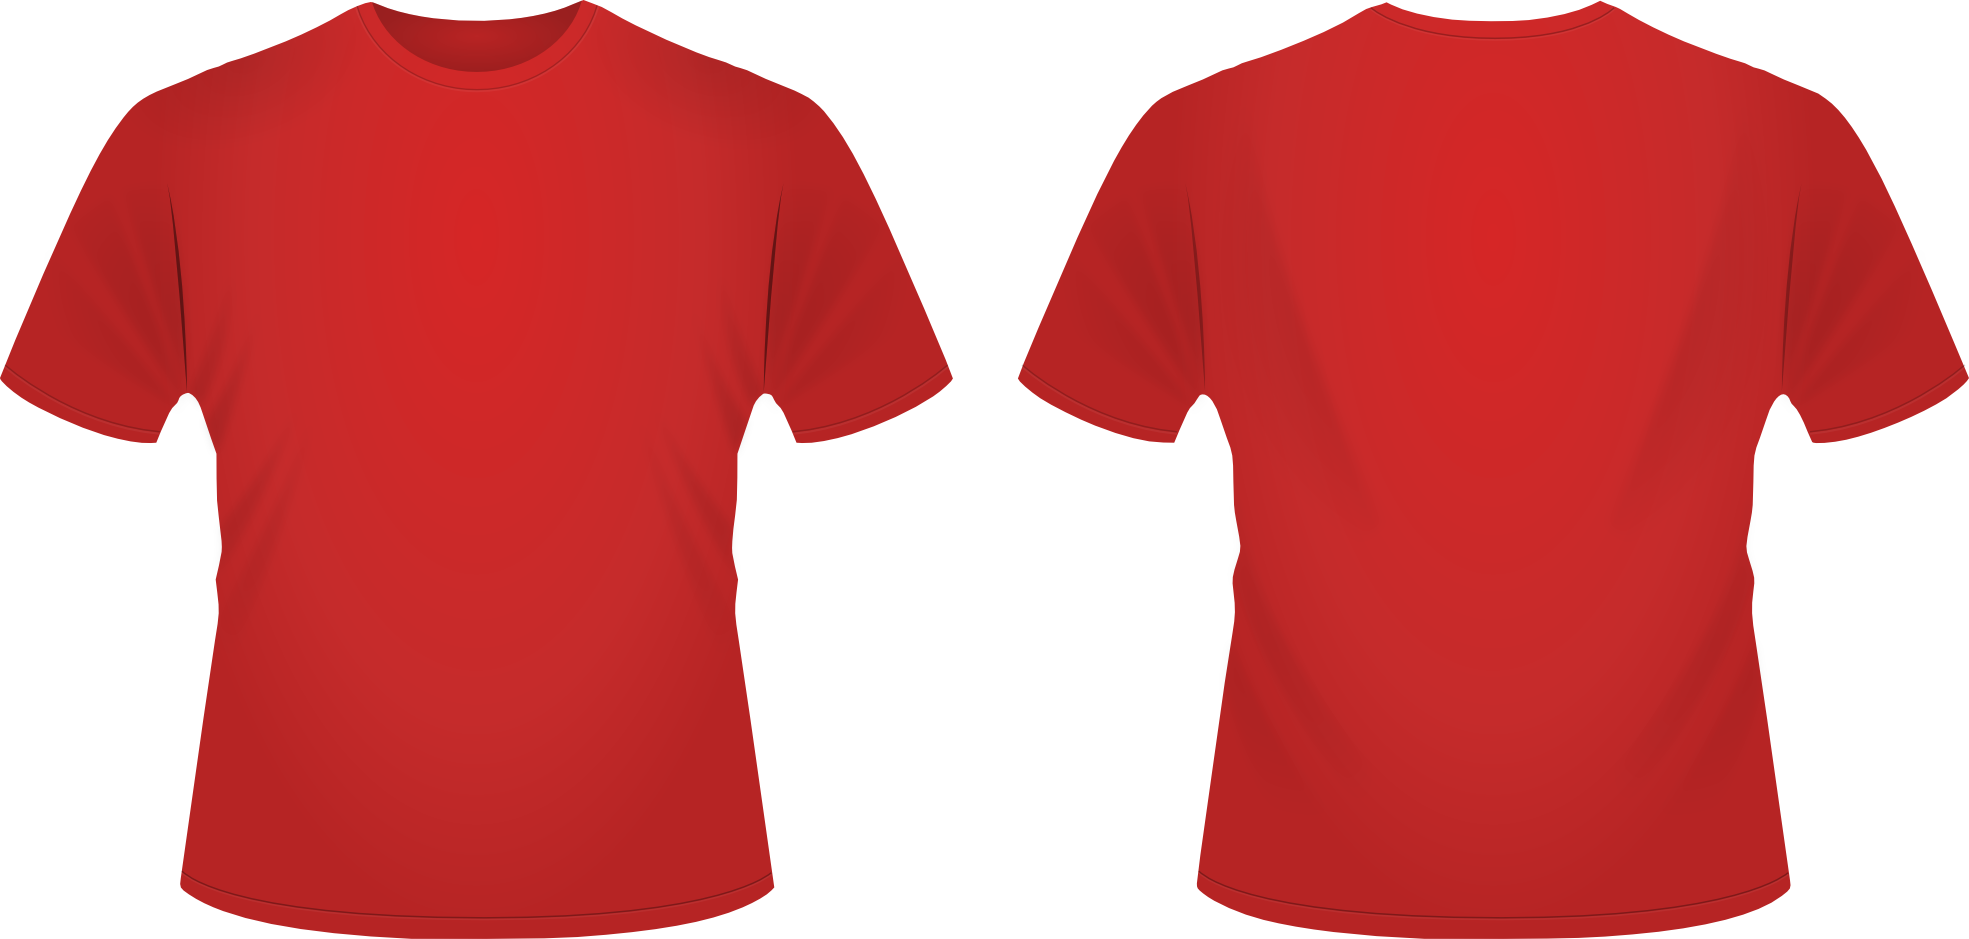 Red Tshirt Template